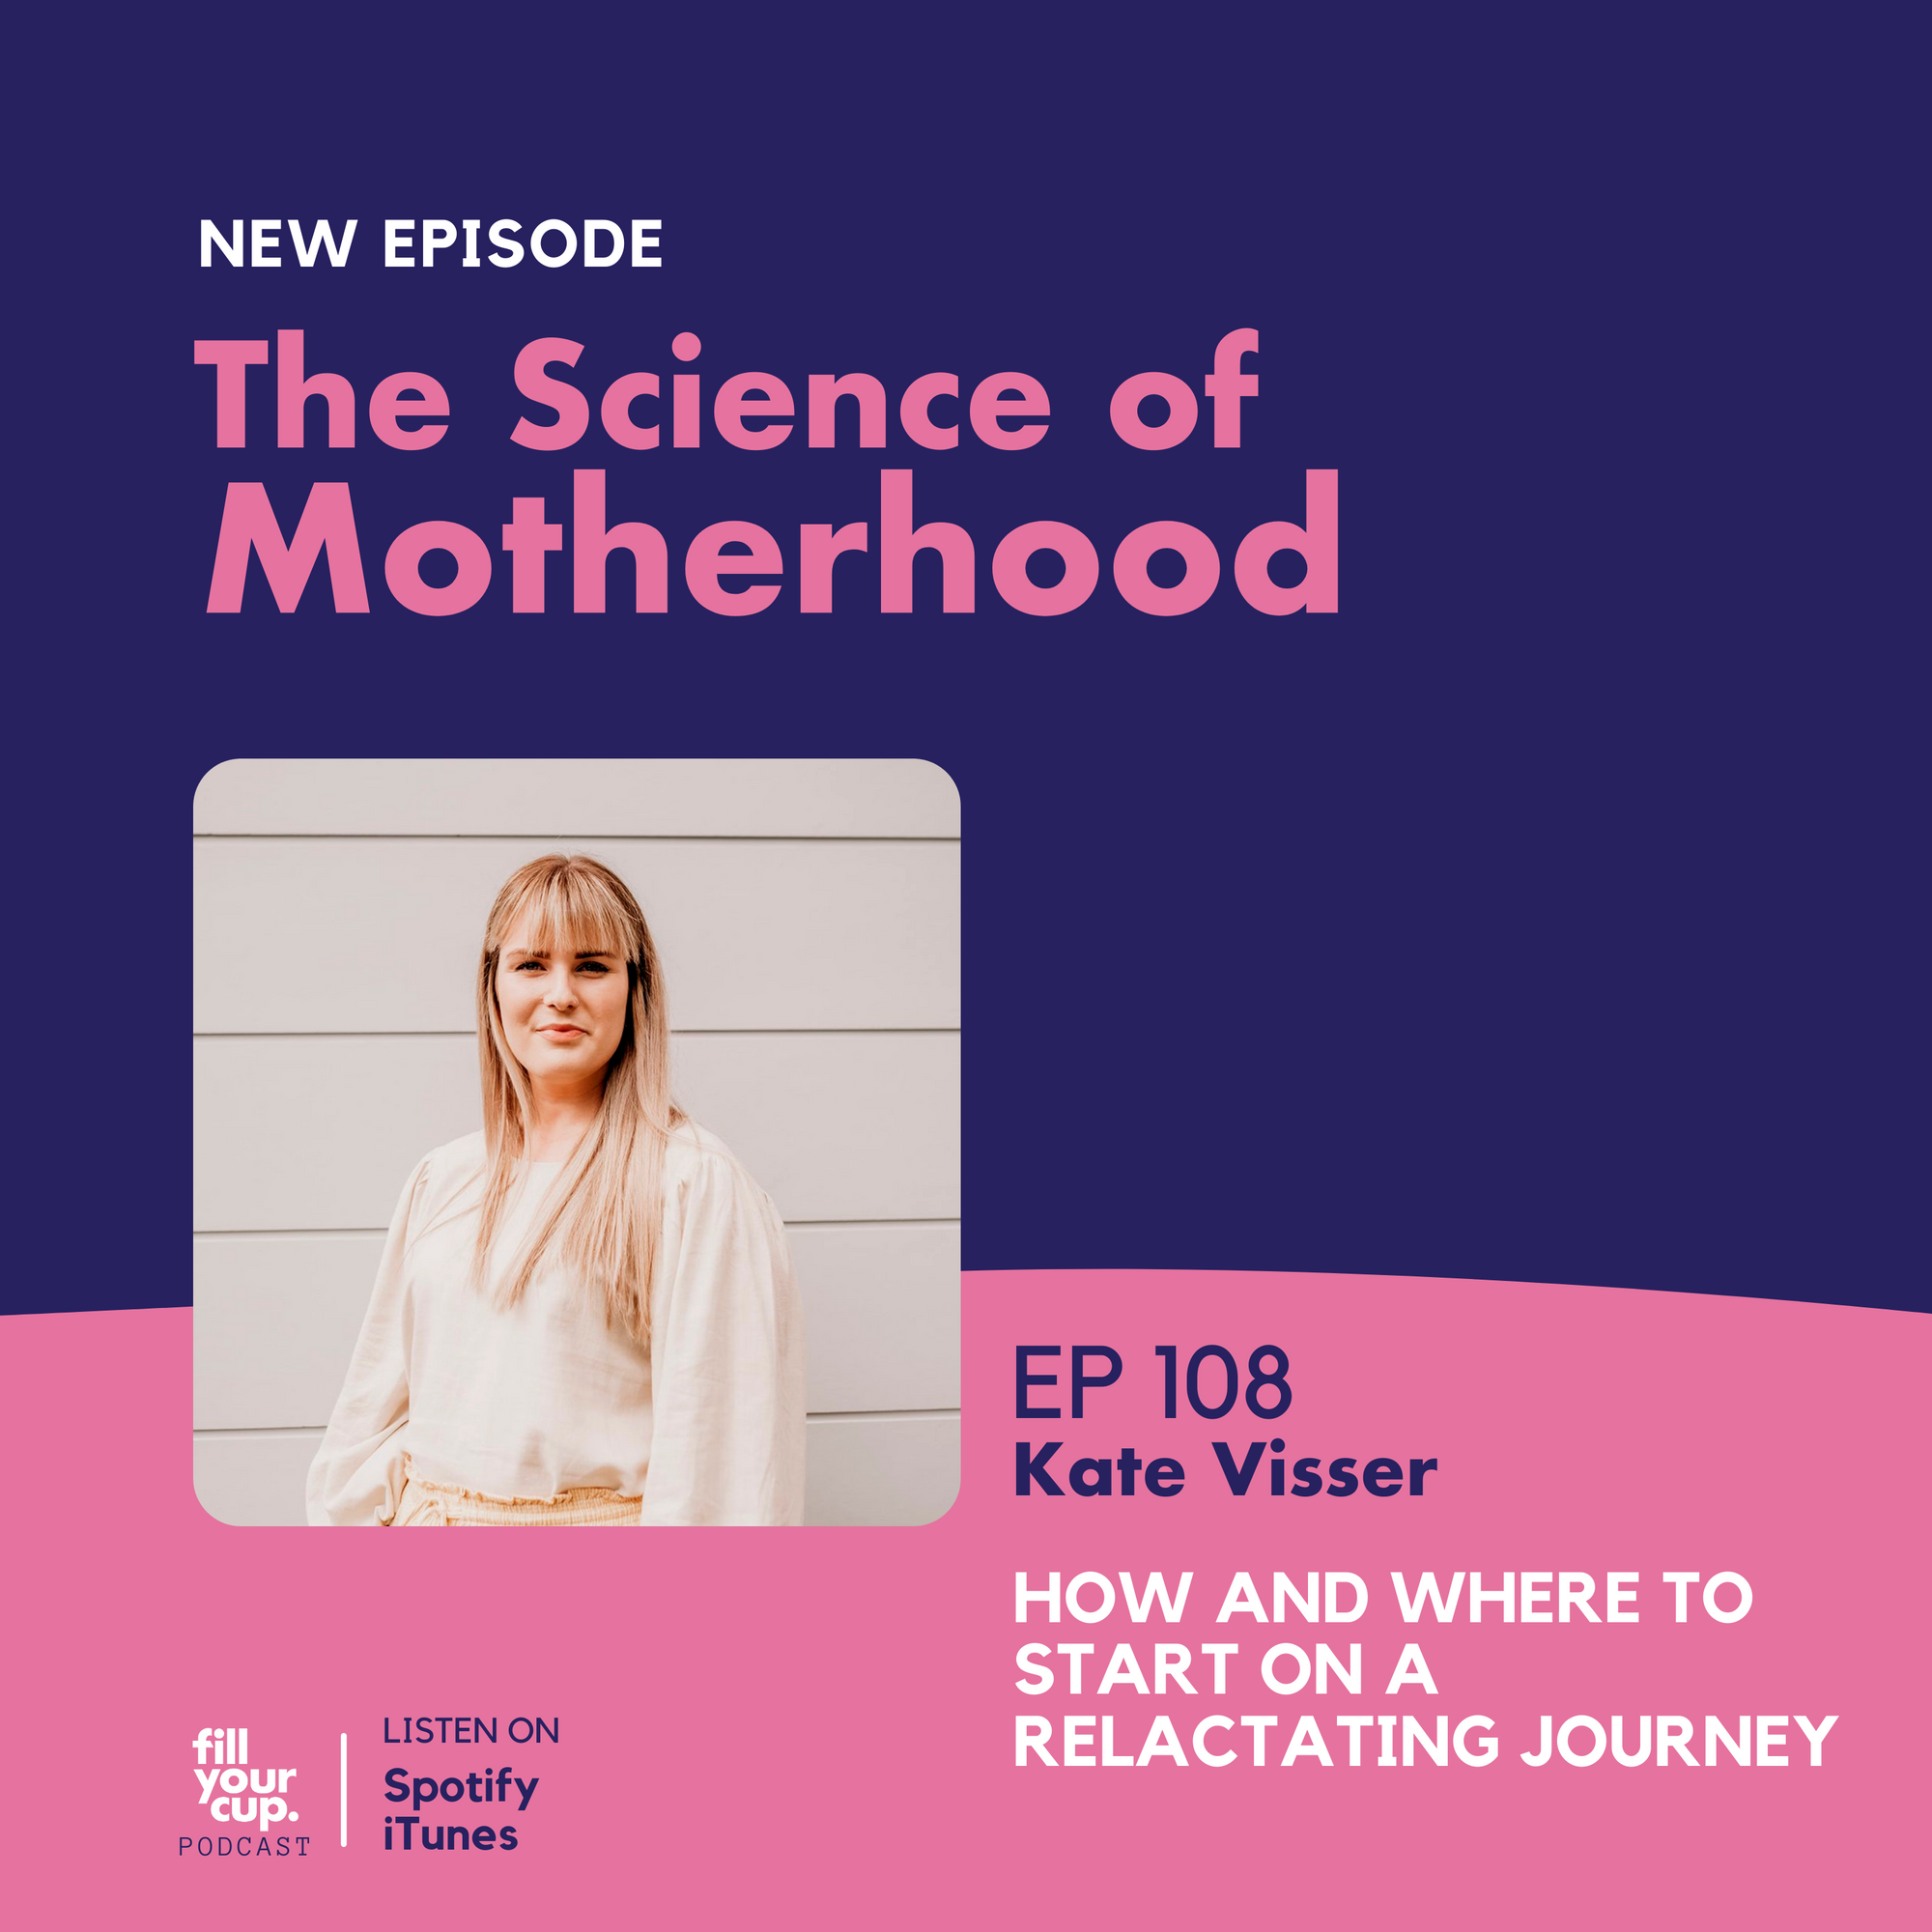 Ep 108. Kate Viser - How and where to start on a relactating journey